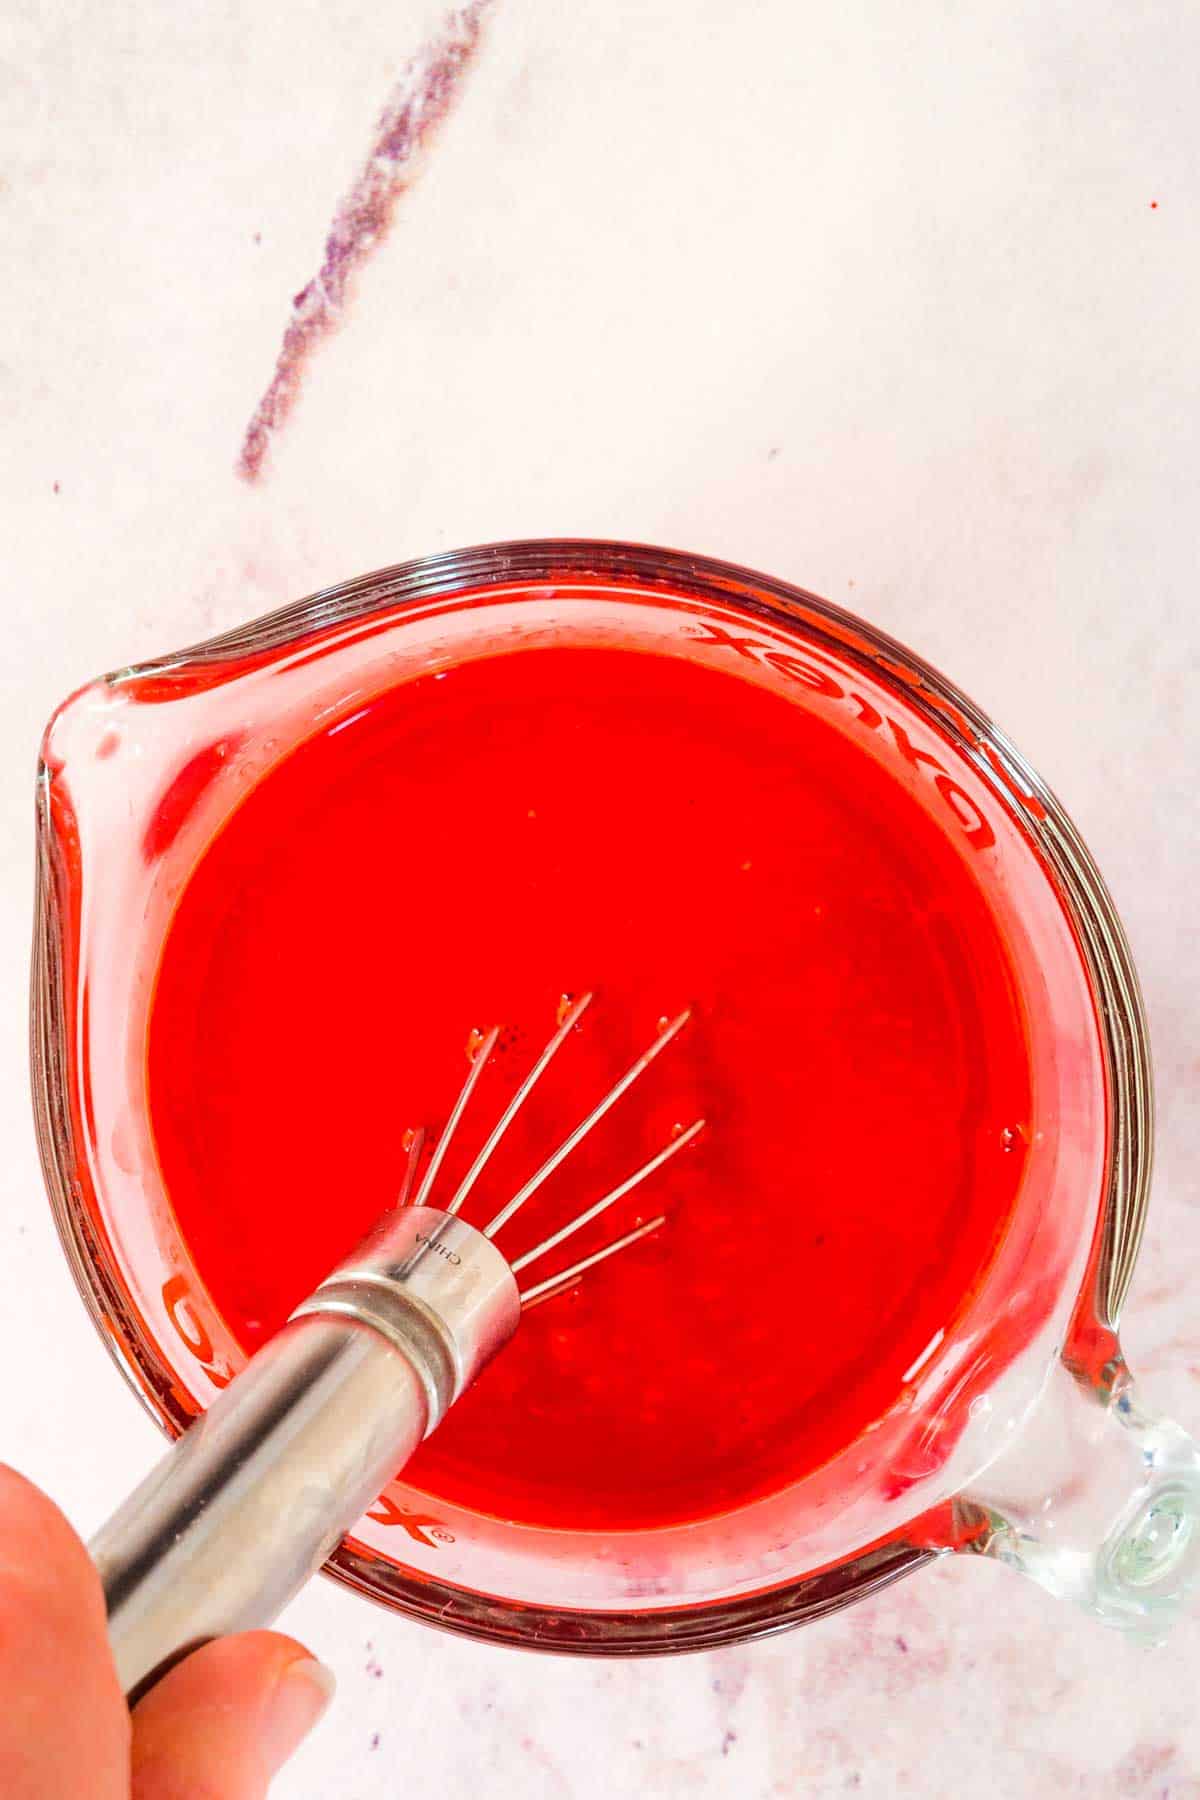 The red milk mixture for red velvet cake in a glass mixing bowl.